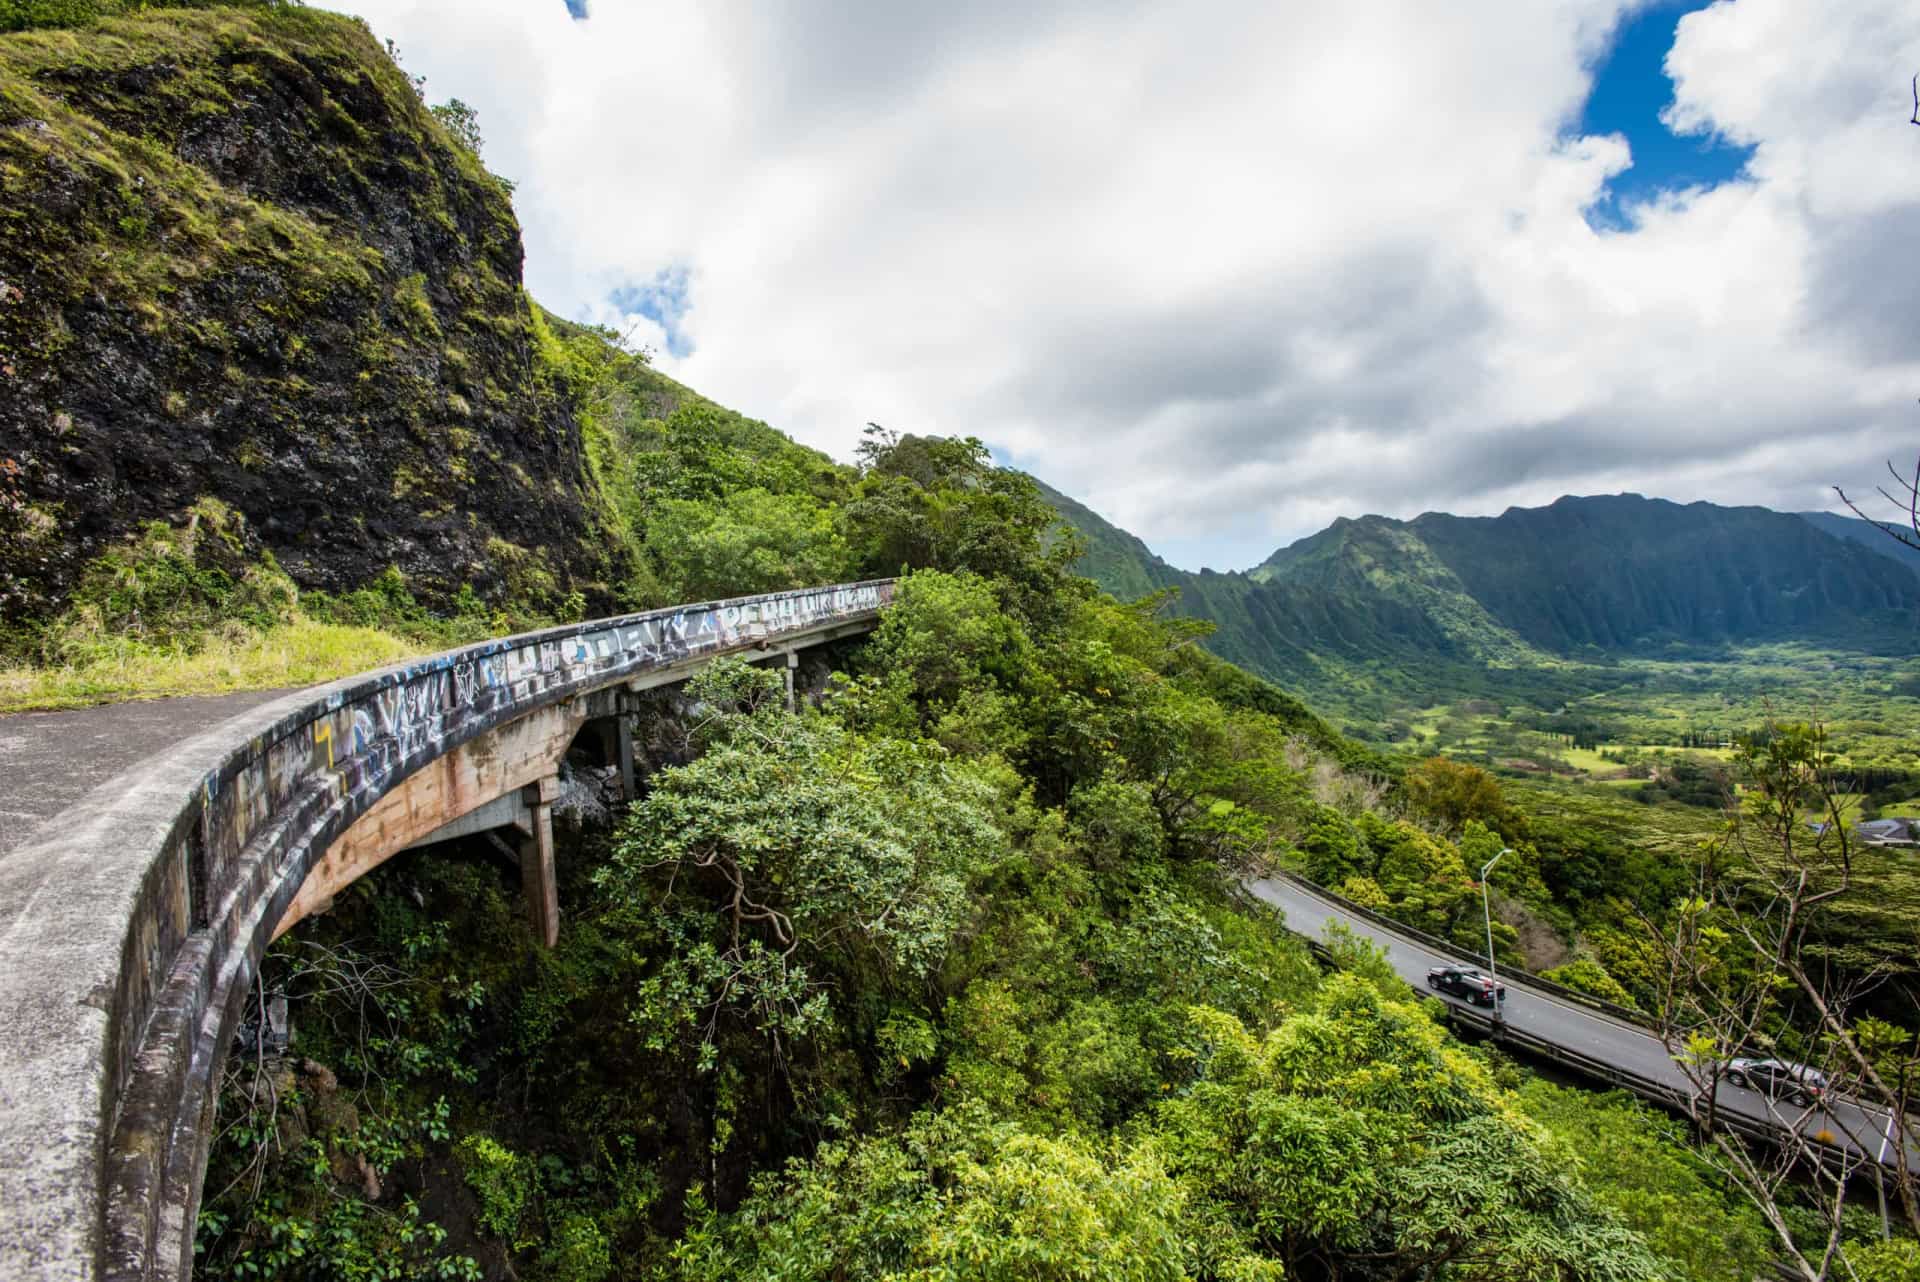 <p>The Pali Highway on the island of Oahu is said to be haunted by the ghost of an old woman and her dog. But there are many haunted spots along the road, including spots where murders took place, a Chinese cemetery, and Iolani Palace, which is said to be haunted by the spirit of Queen Lili'uokalani.</p>